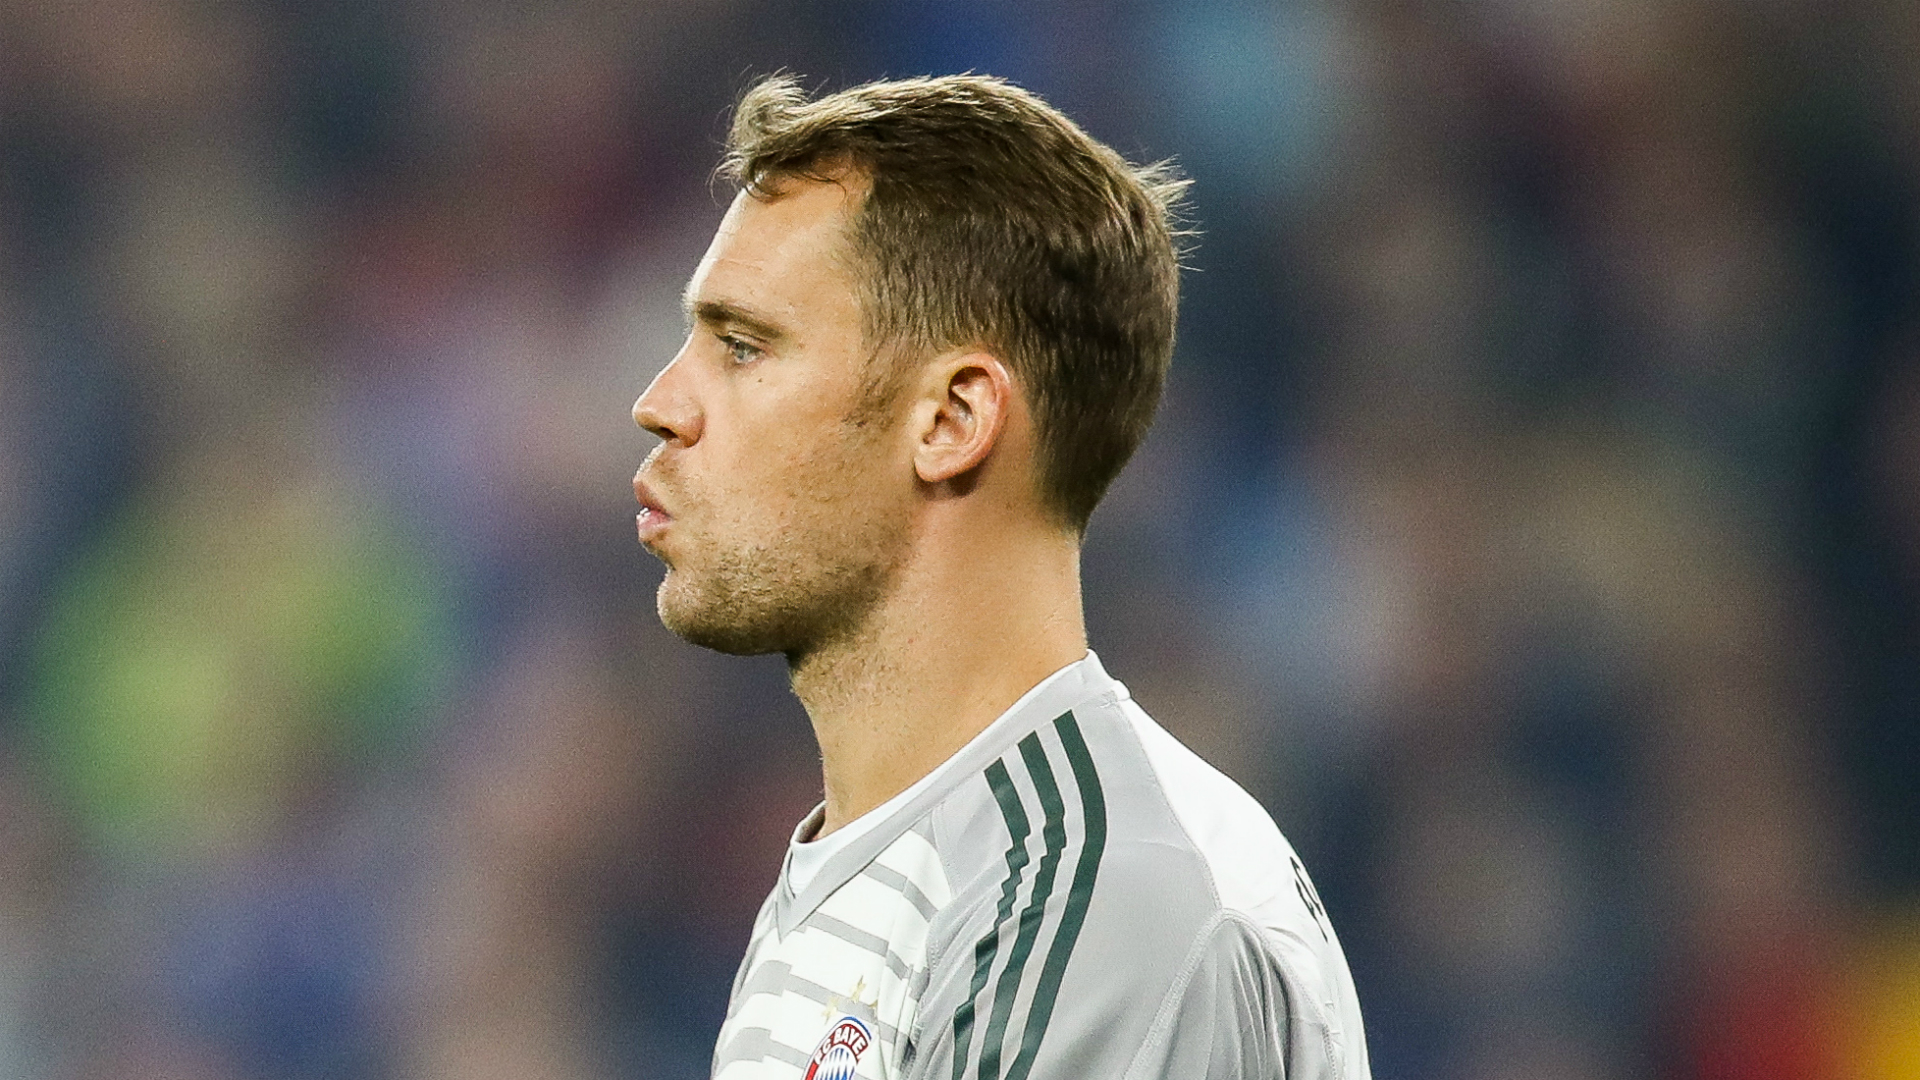 Neuer Error Costly As Bayern Munich Drop First Points With 1-1 Draw To Augsburg